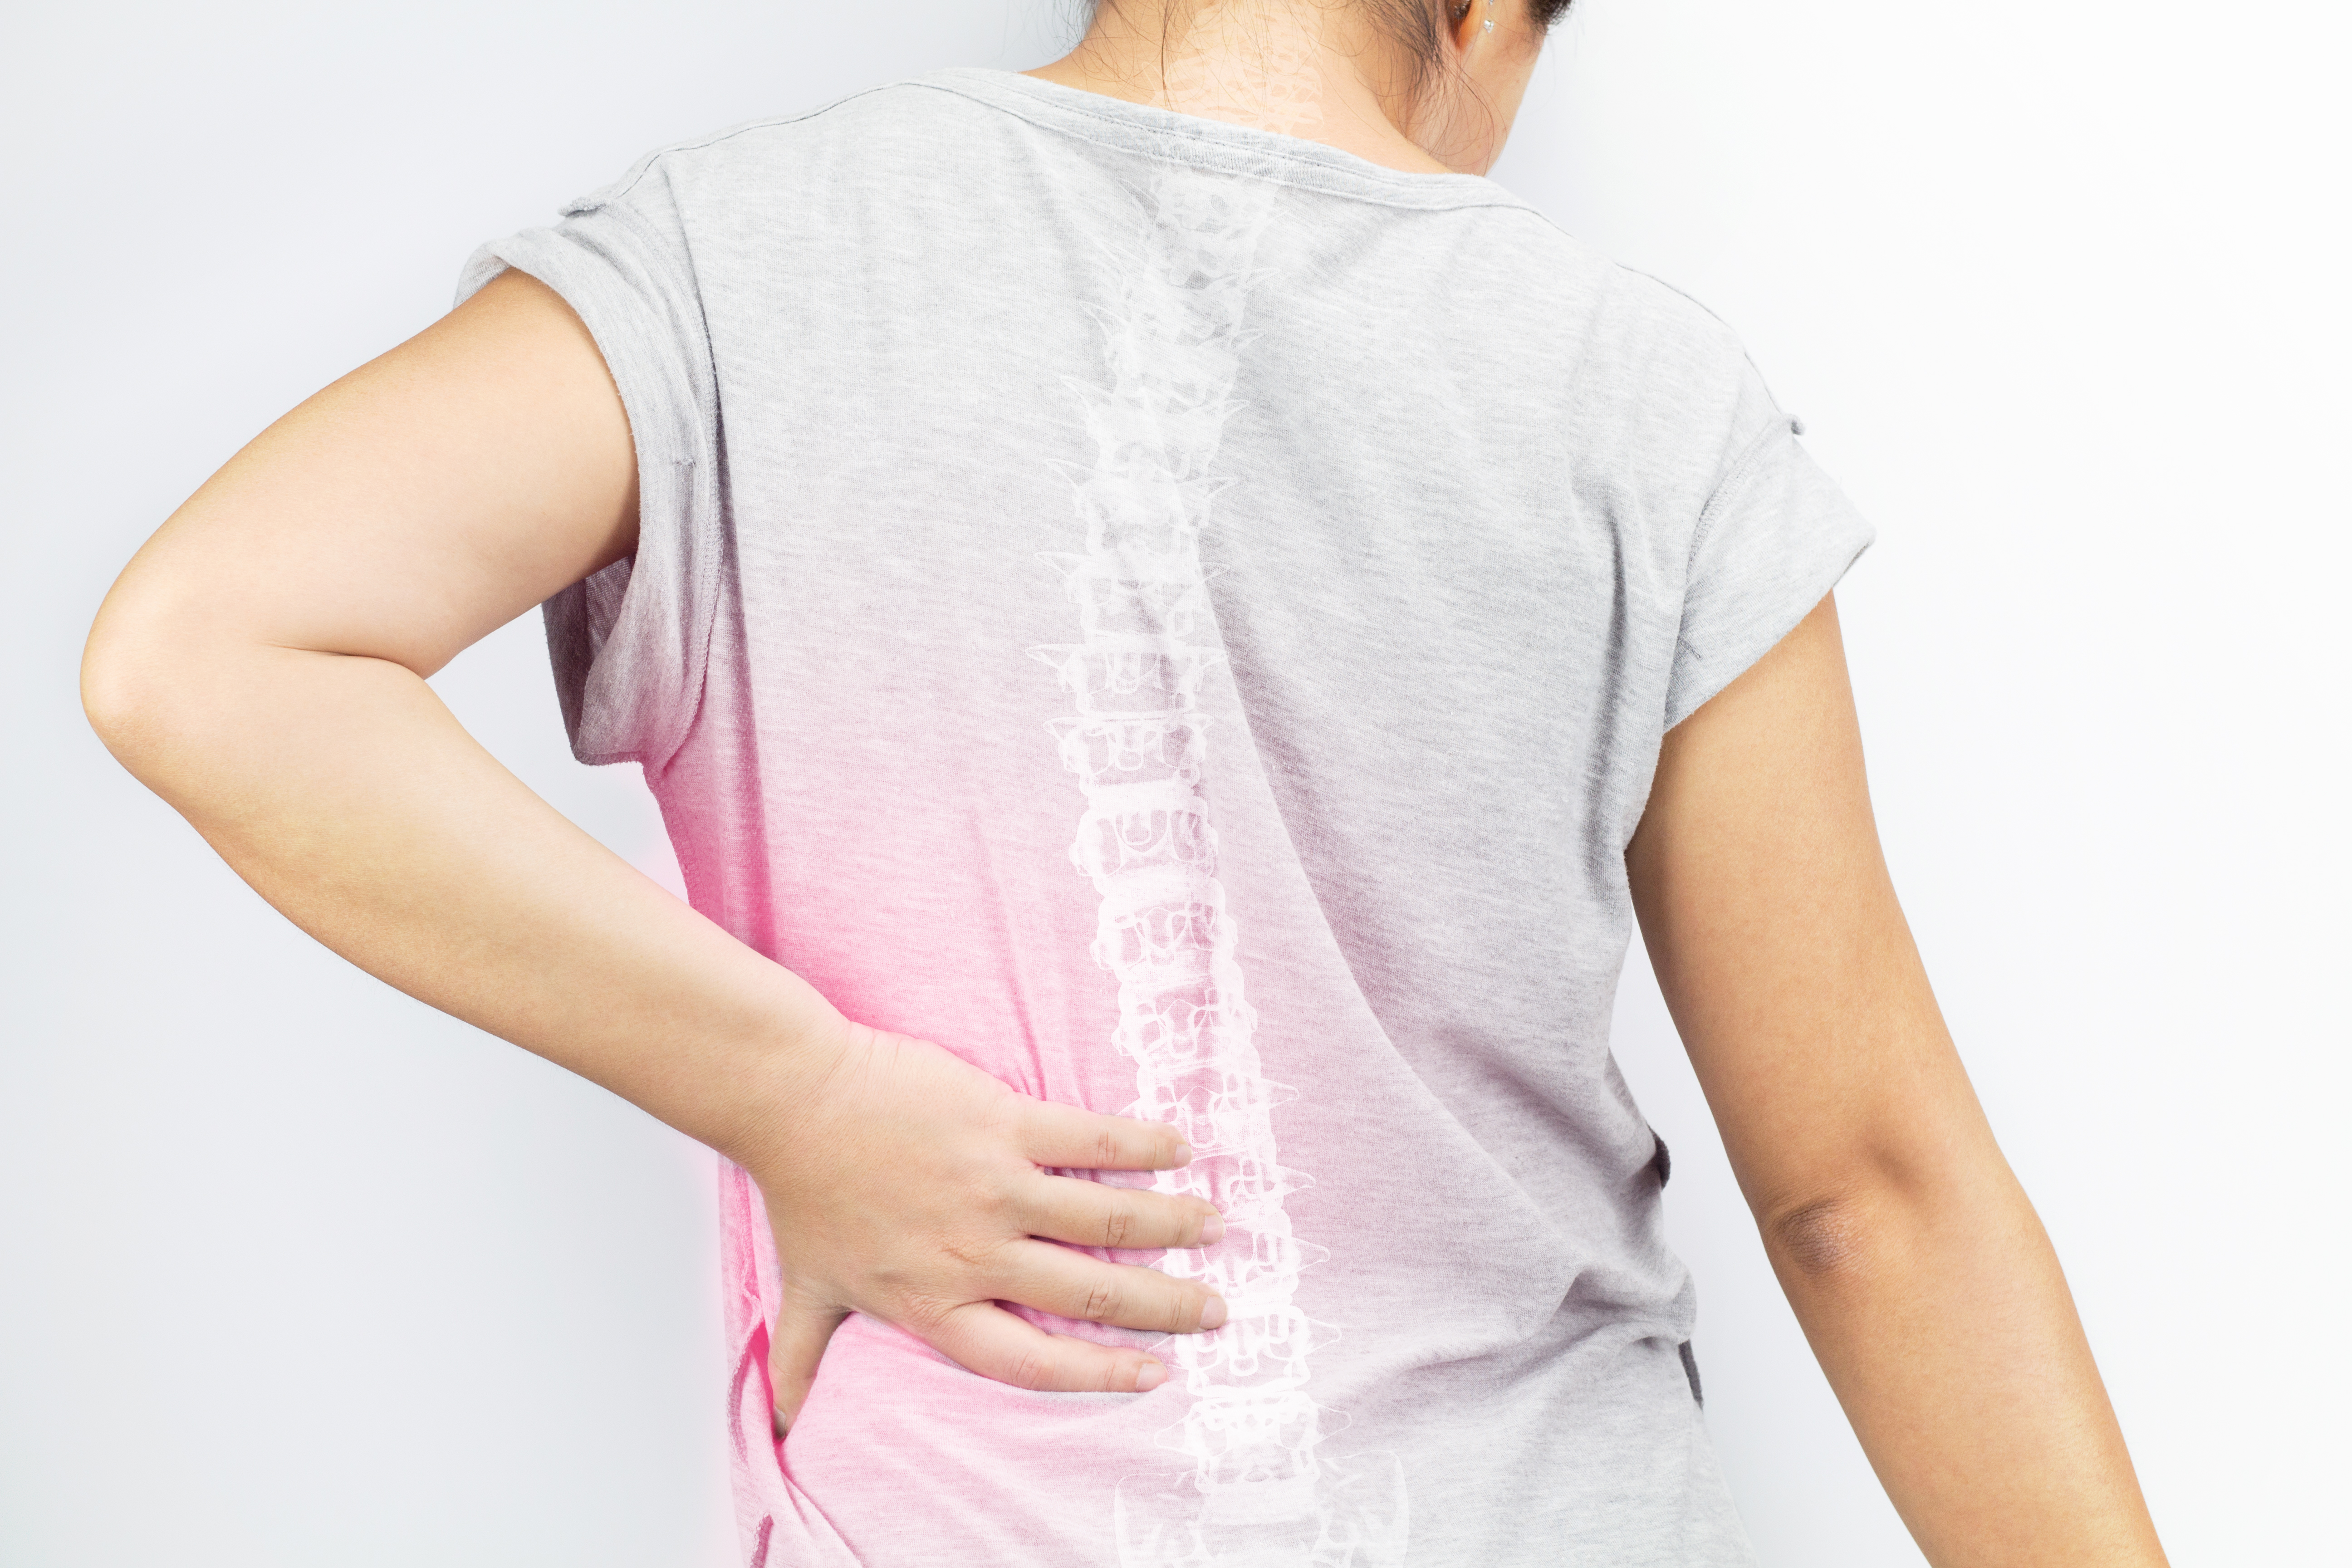 A person touching their back with an illustration of a spine overlaid on their t-shirt